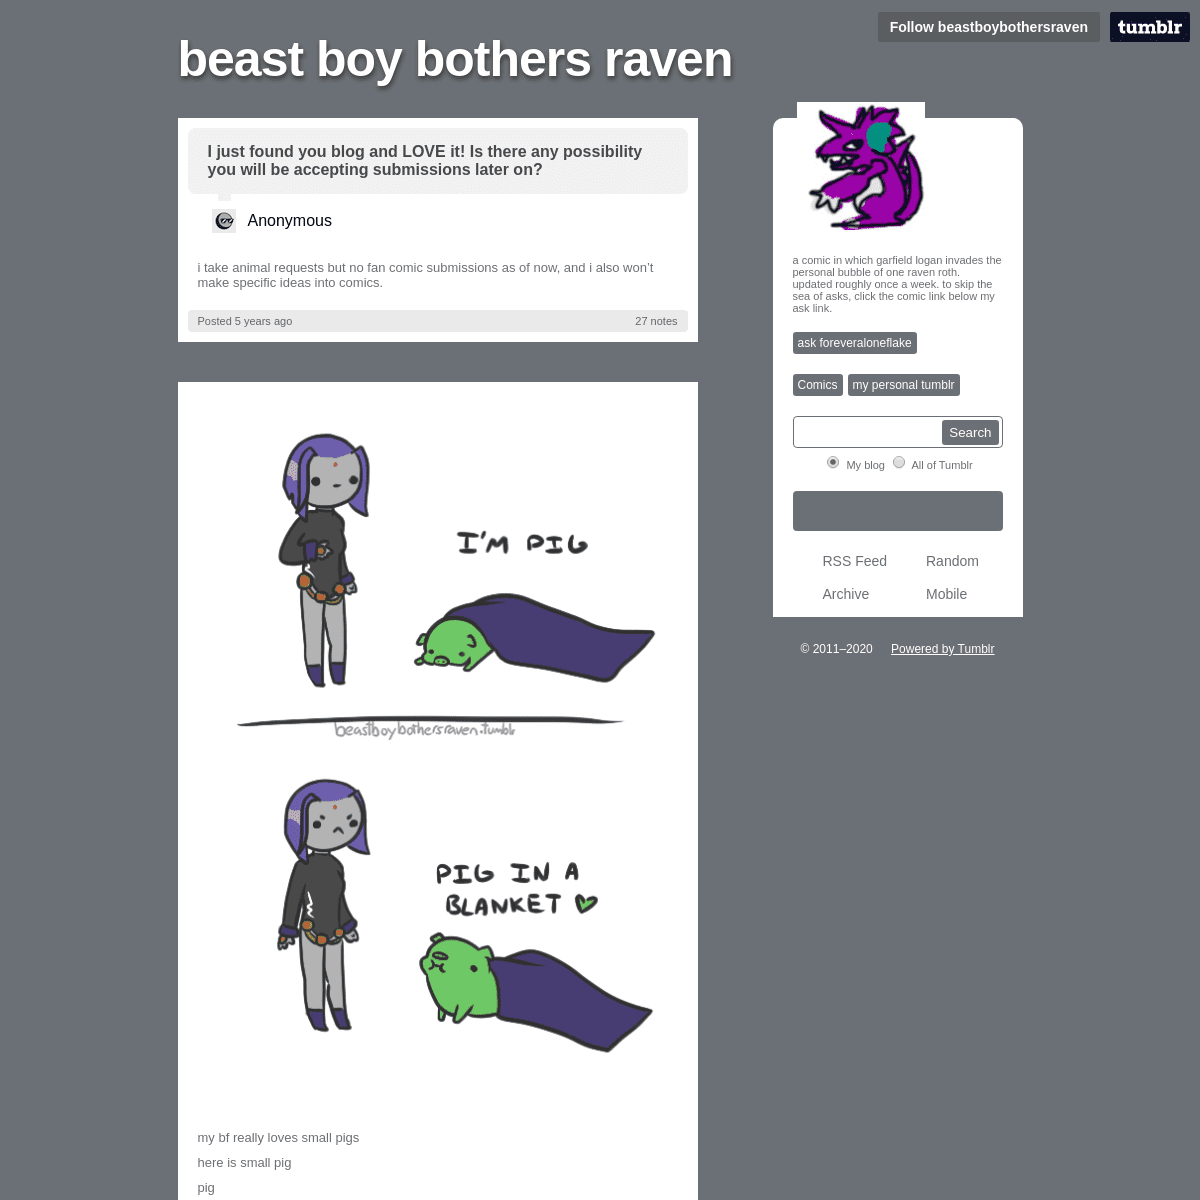 A complete backup of beastboybothersraven.tumblr.com